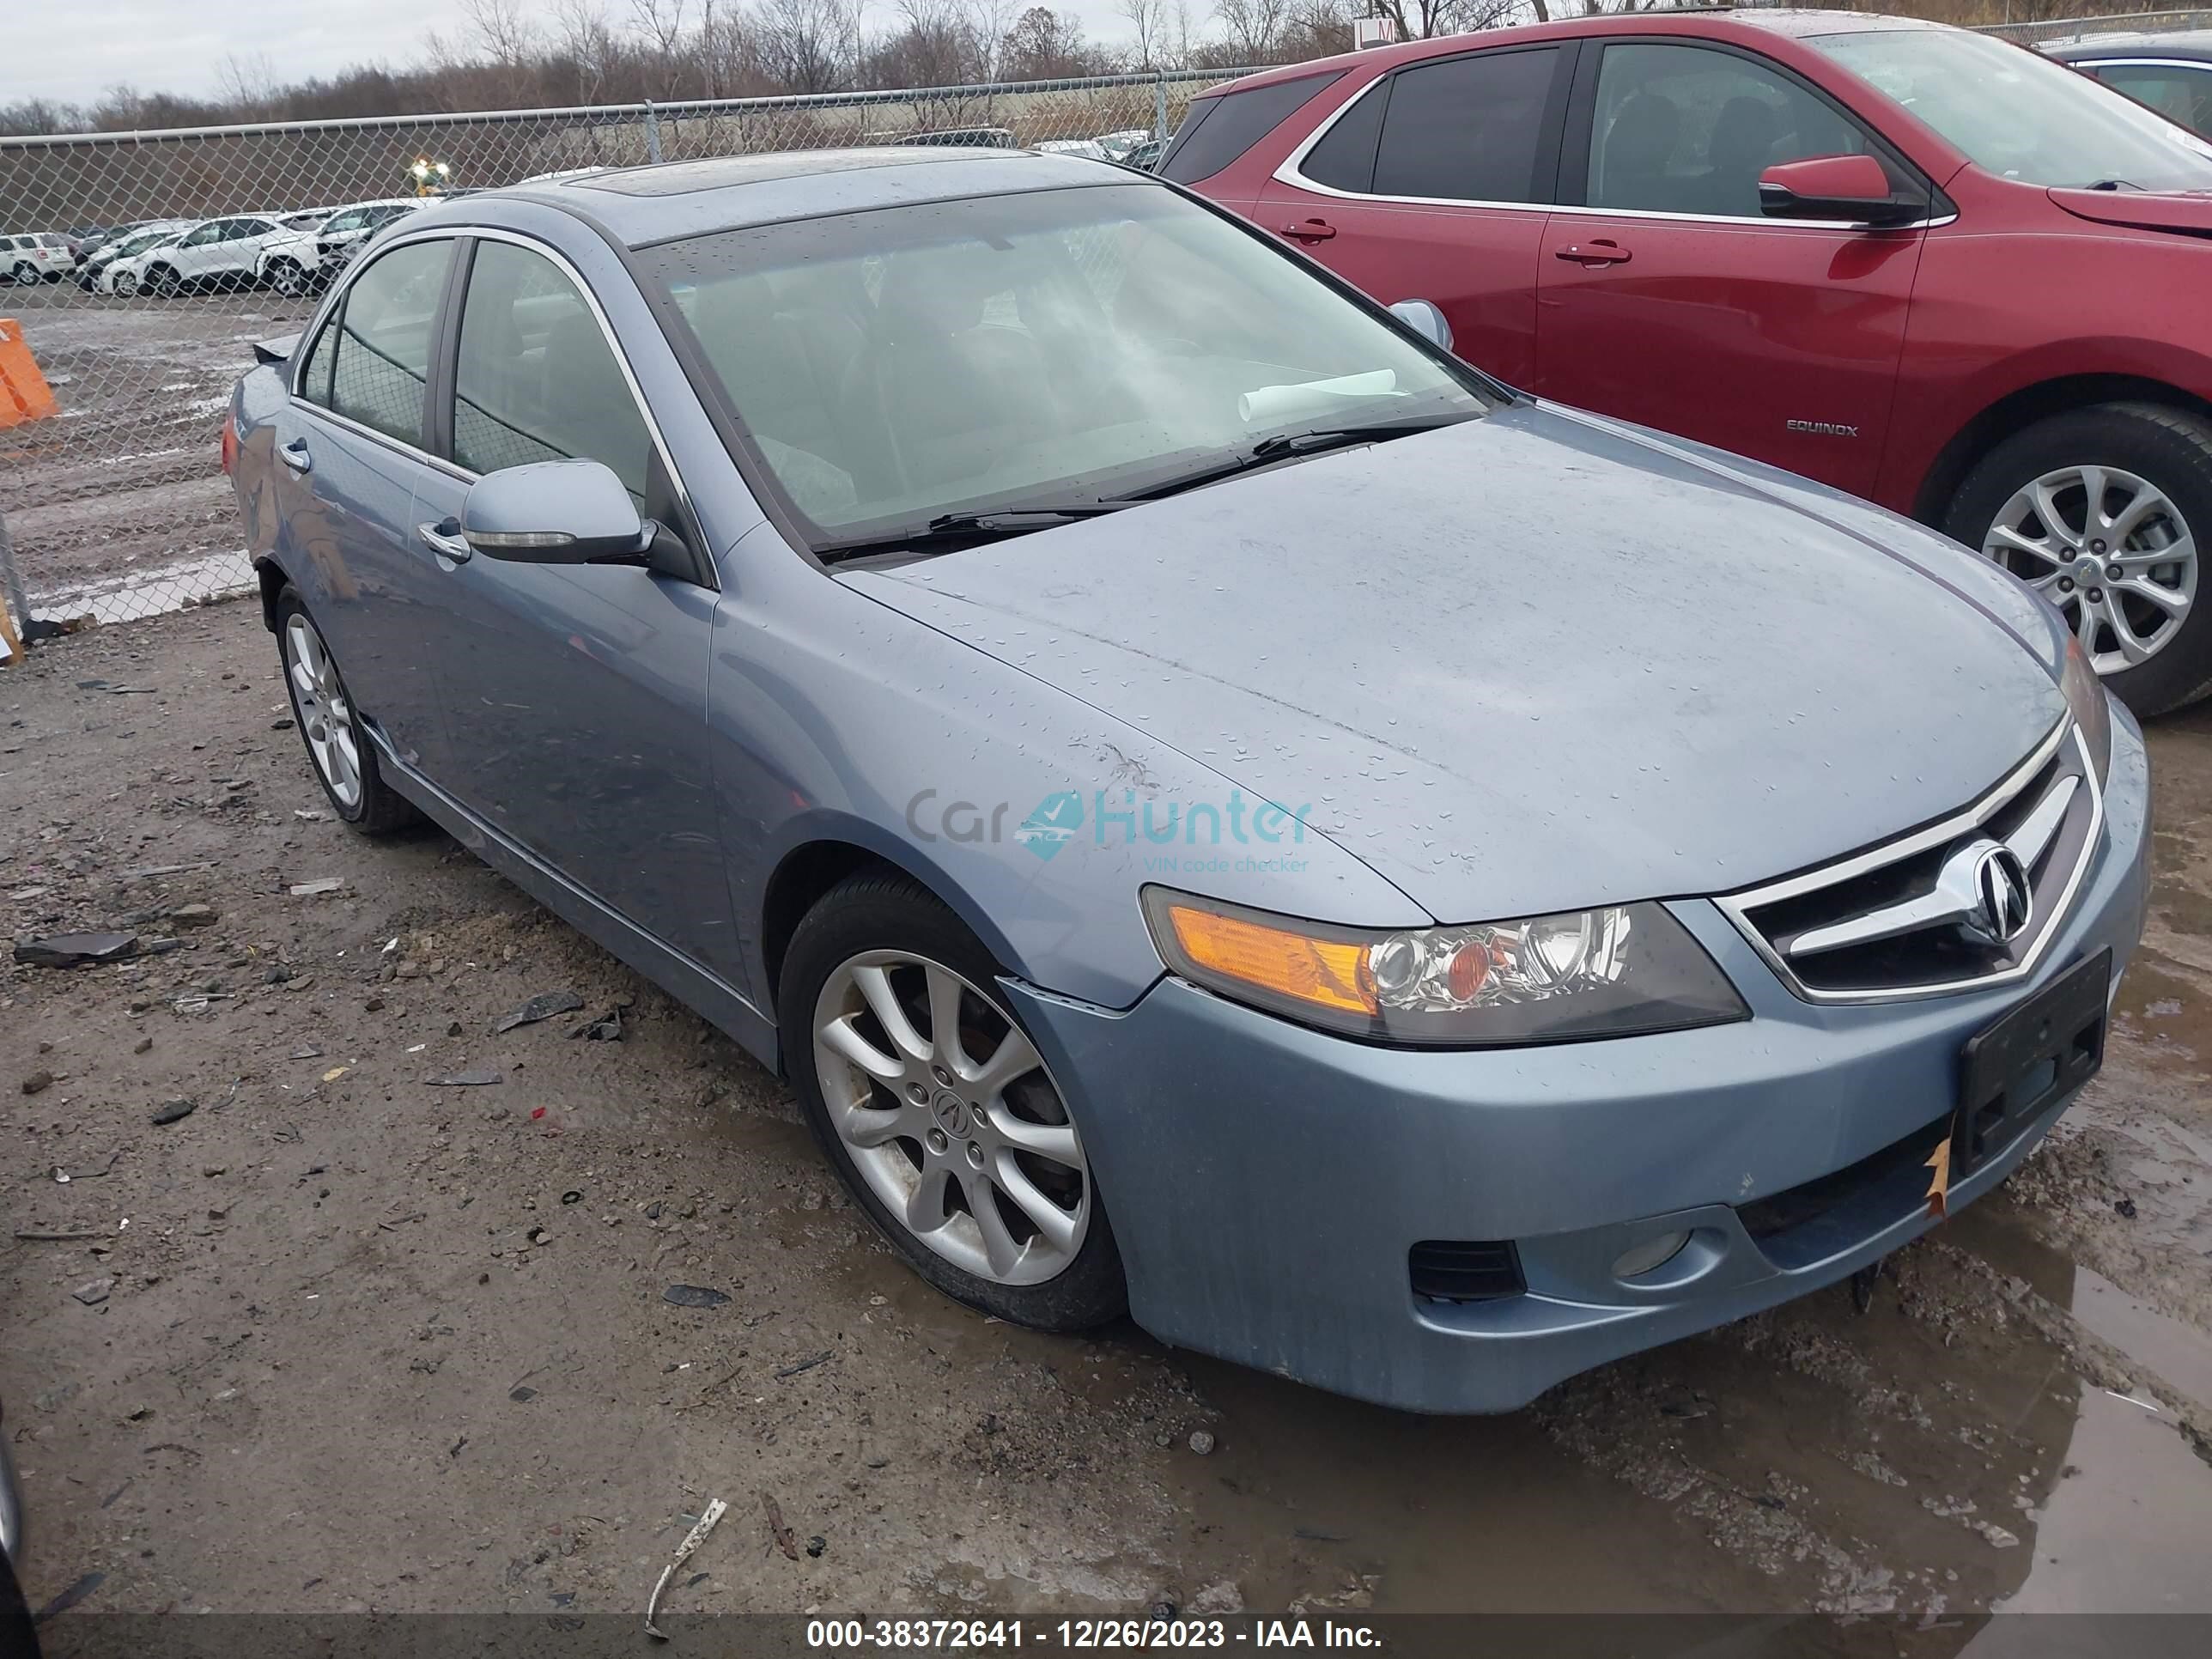 acura tsx 2006 jh4cl96816c001802